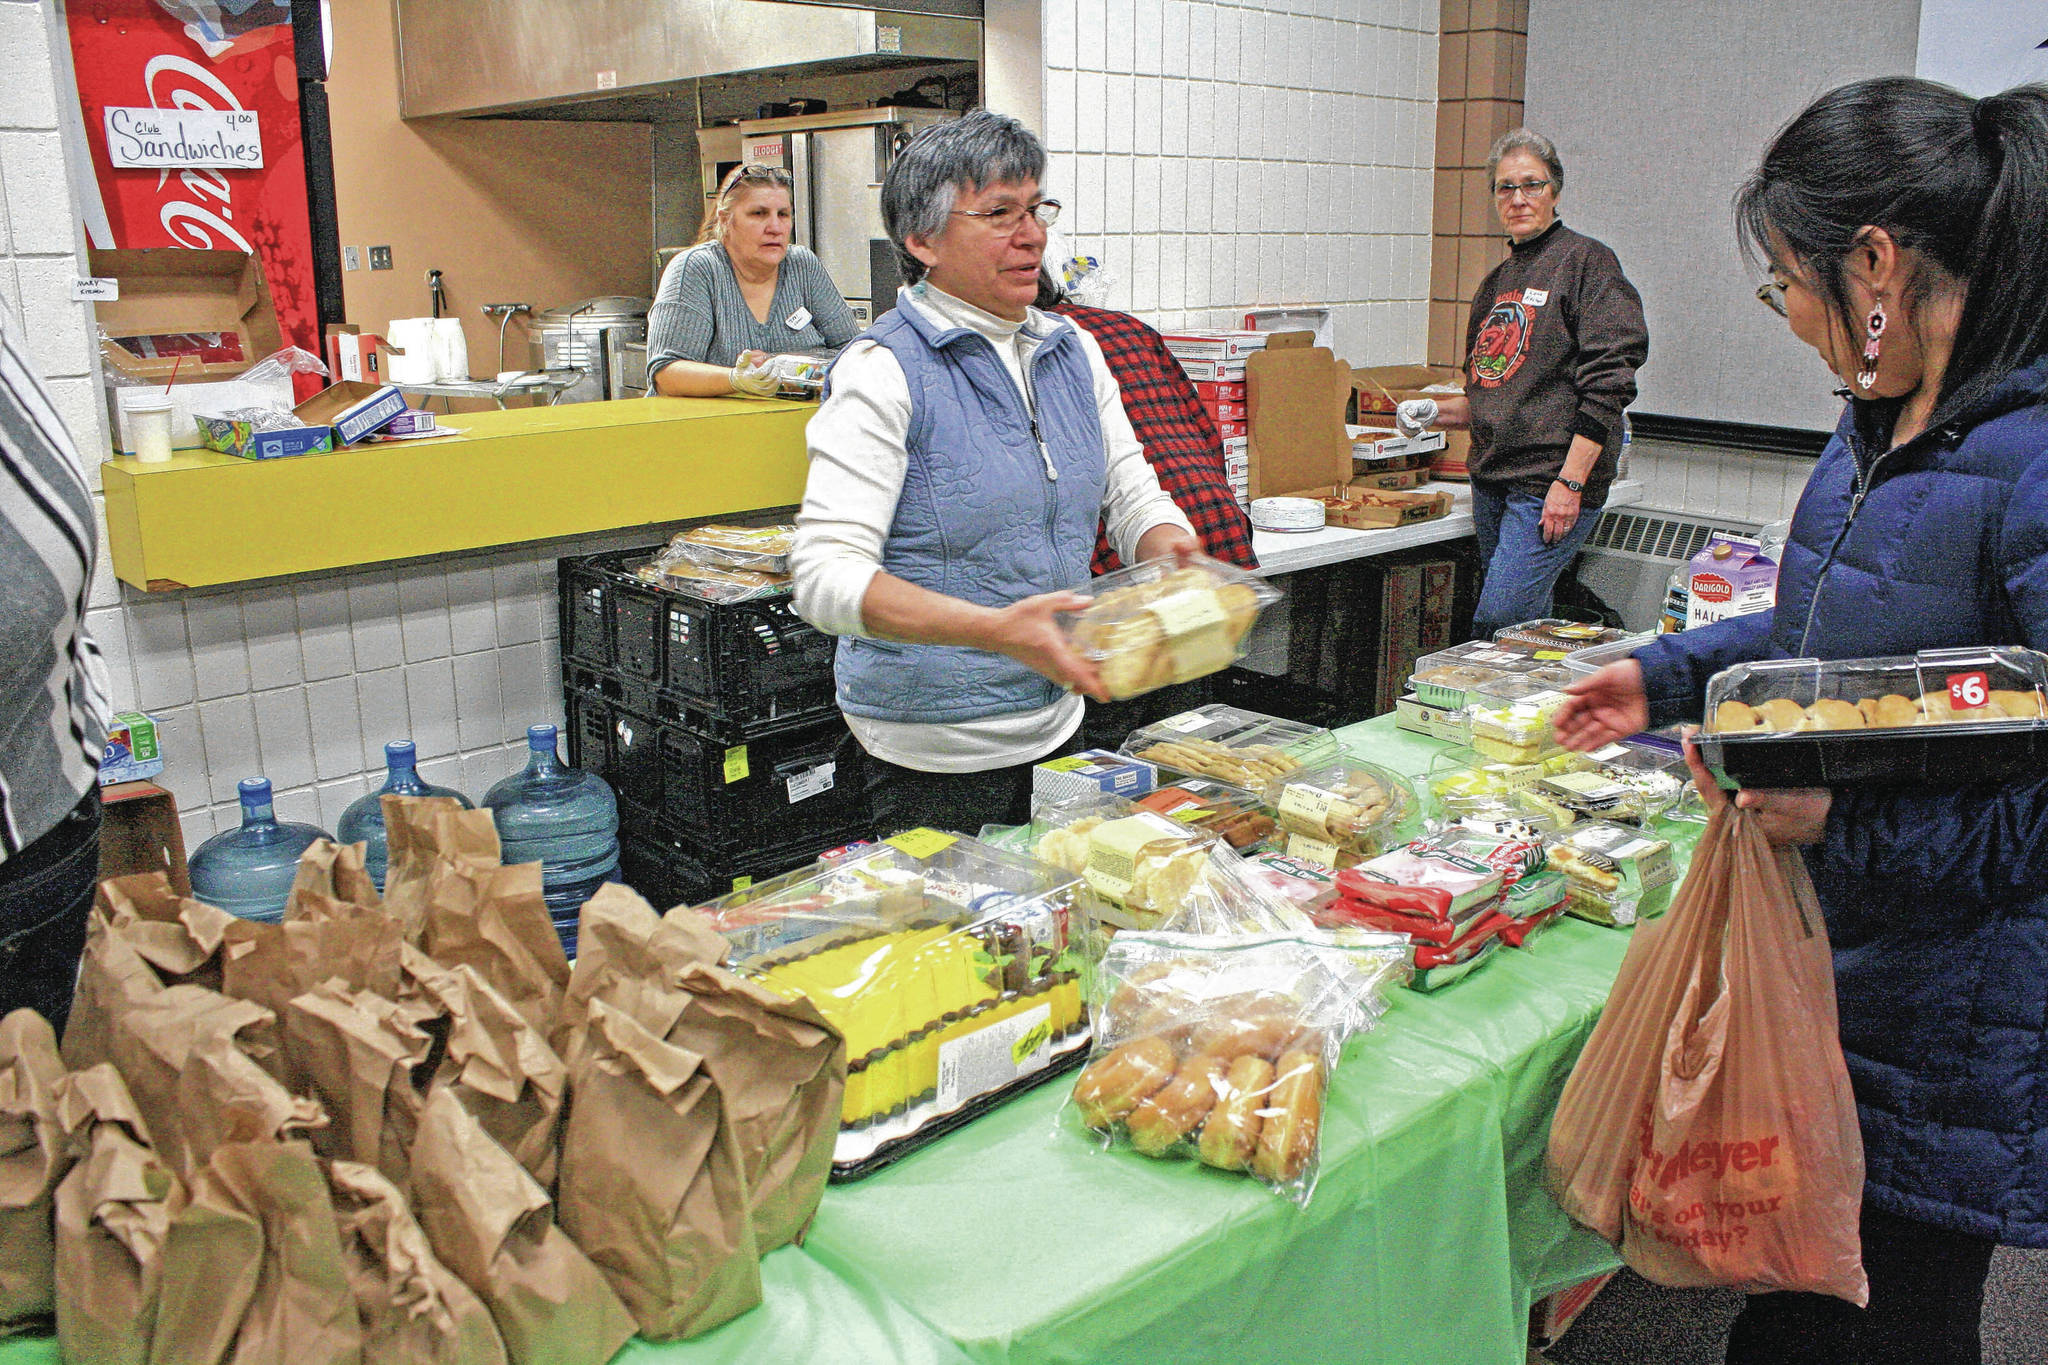 Volunteers staff the kitchen and buffet line at the Jan. 24, 2018, Project Homeless Connect at the Soldotna Regional Sports Complex. The annual event gathers service providers, nonprofits and volunteers to support members of the homeless community and those in need. (Photo by Erin Thompson/Peninsula Clarion)